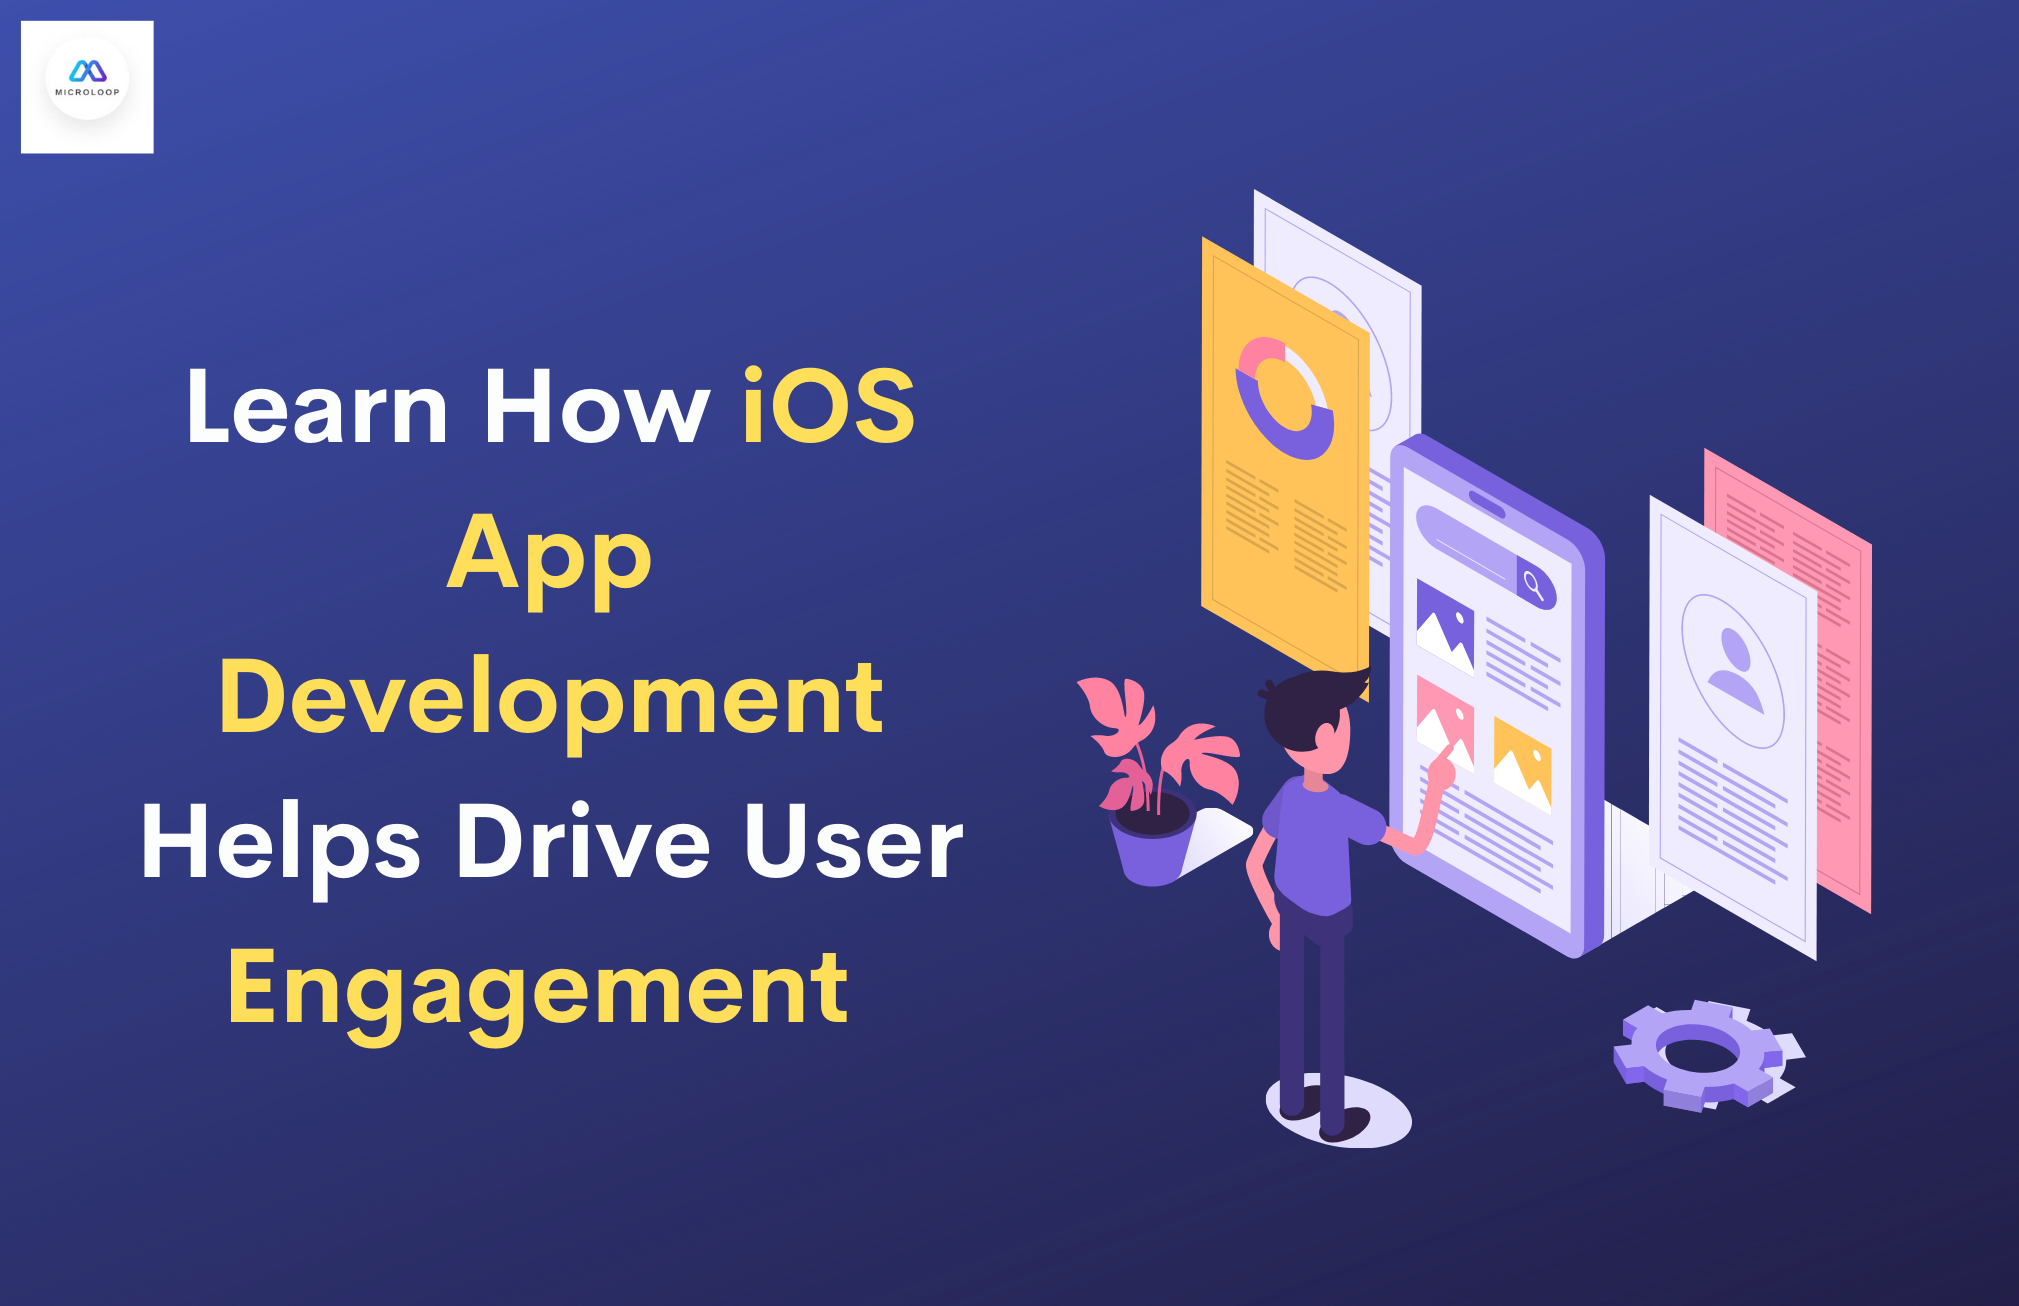 Learn How iOS App Development Helps Drive User Engagement